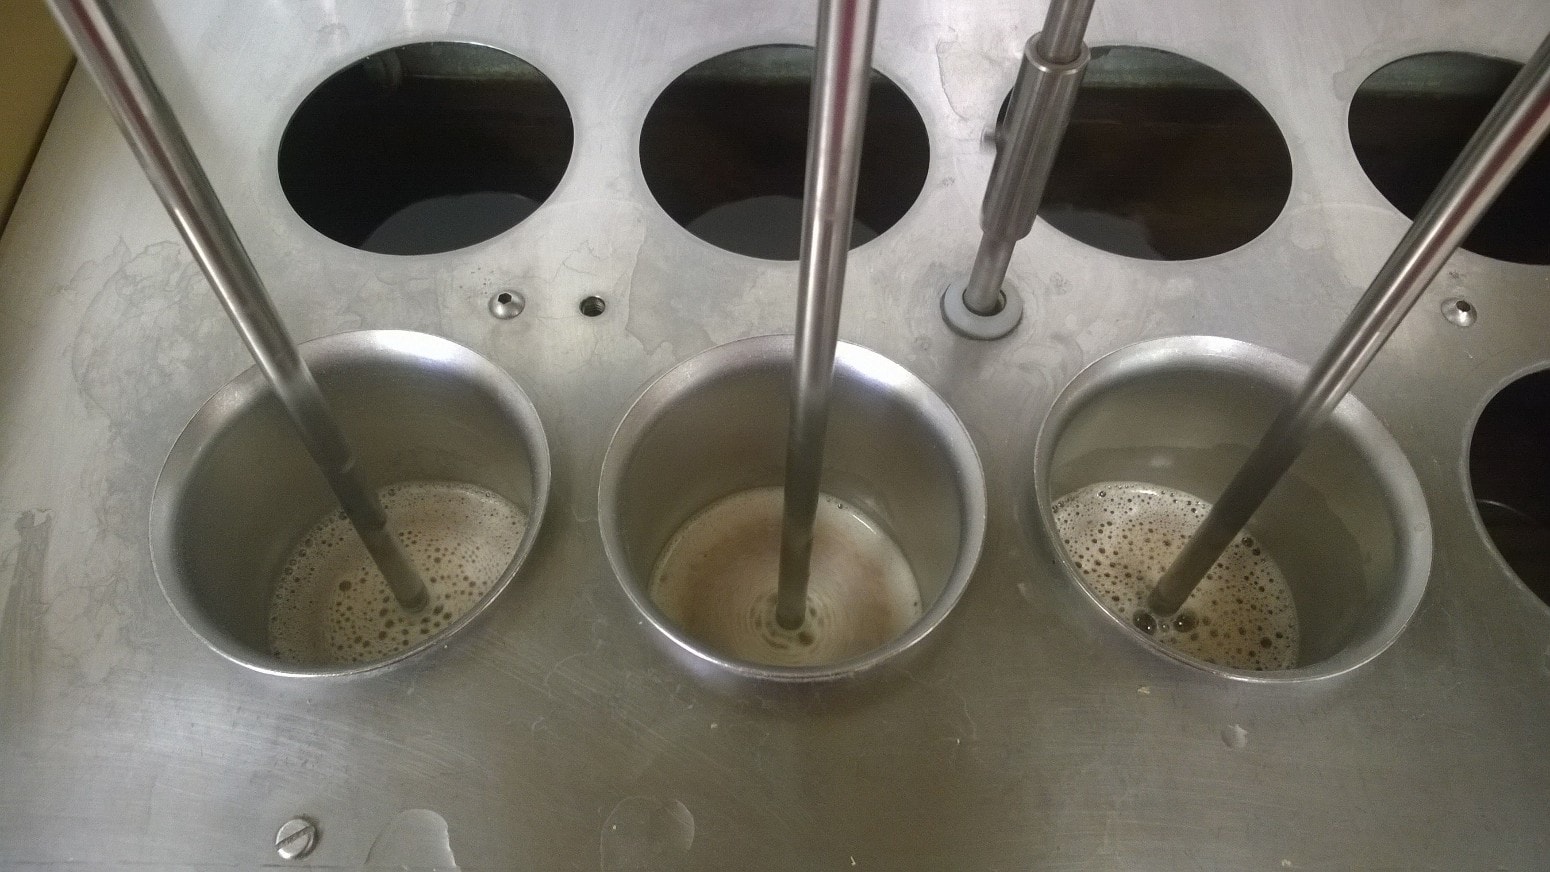 Congress Mash: Samples in the mash bath being automatically stirred at the Briess Lab